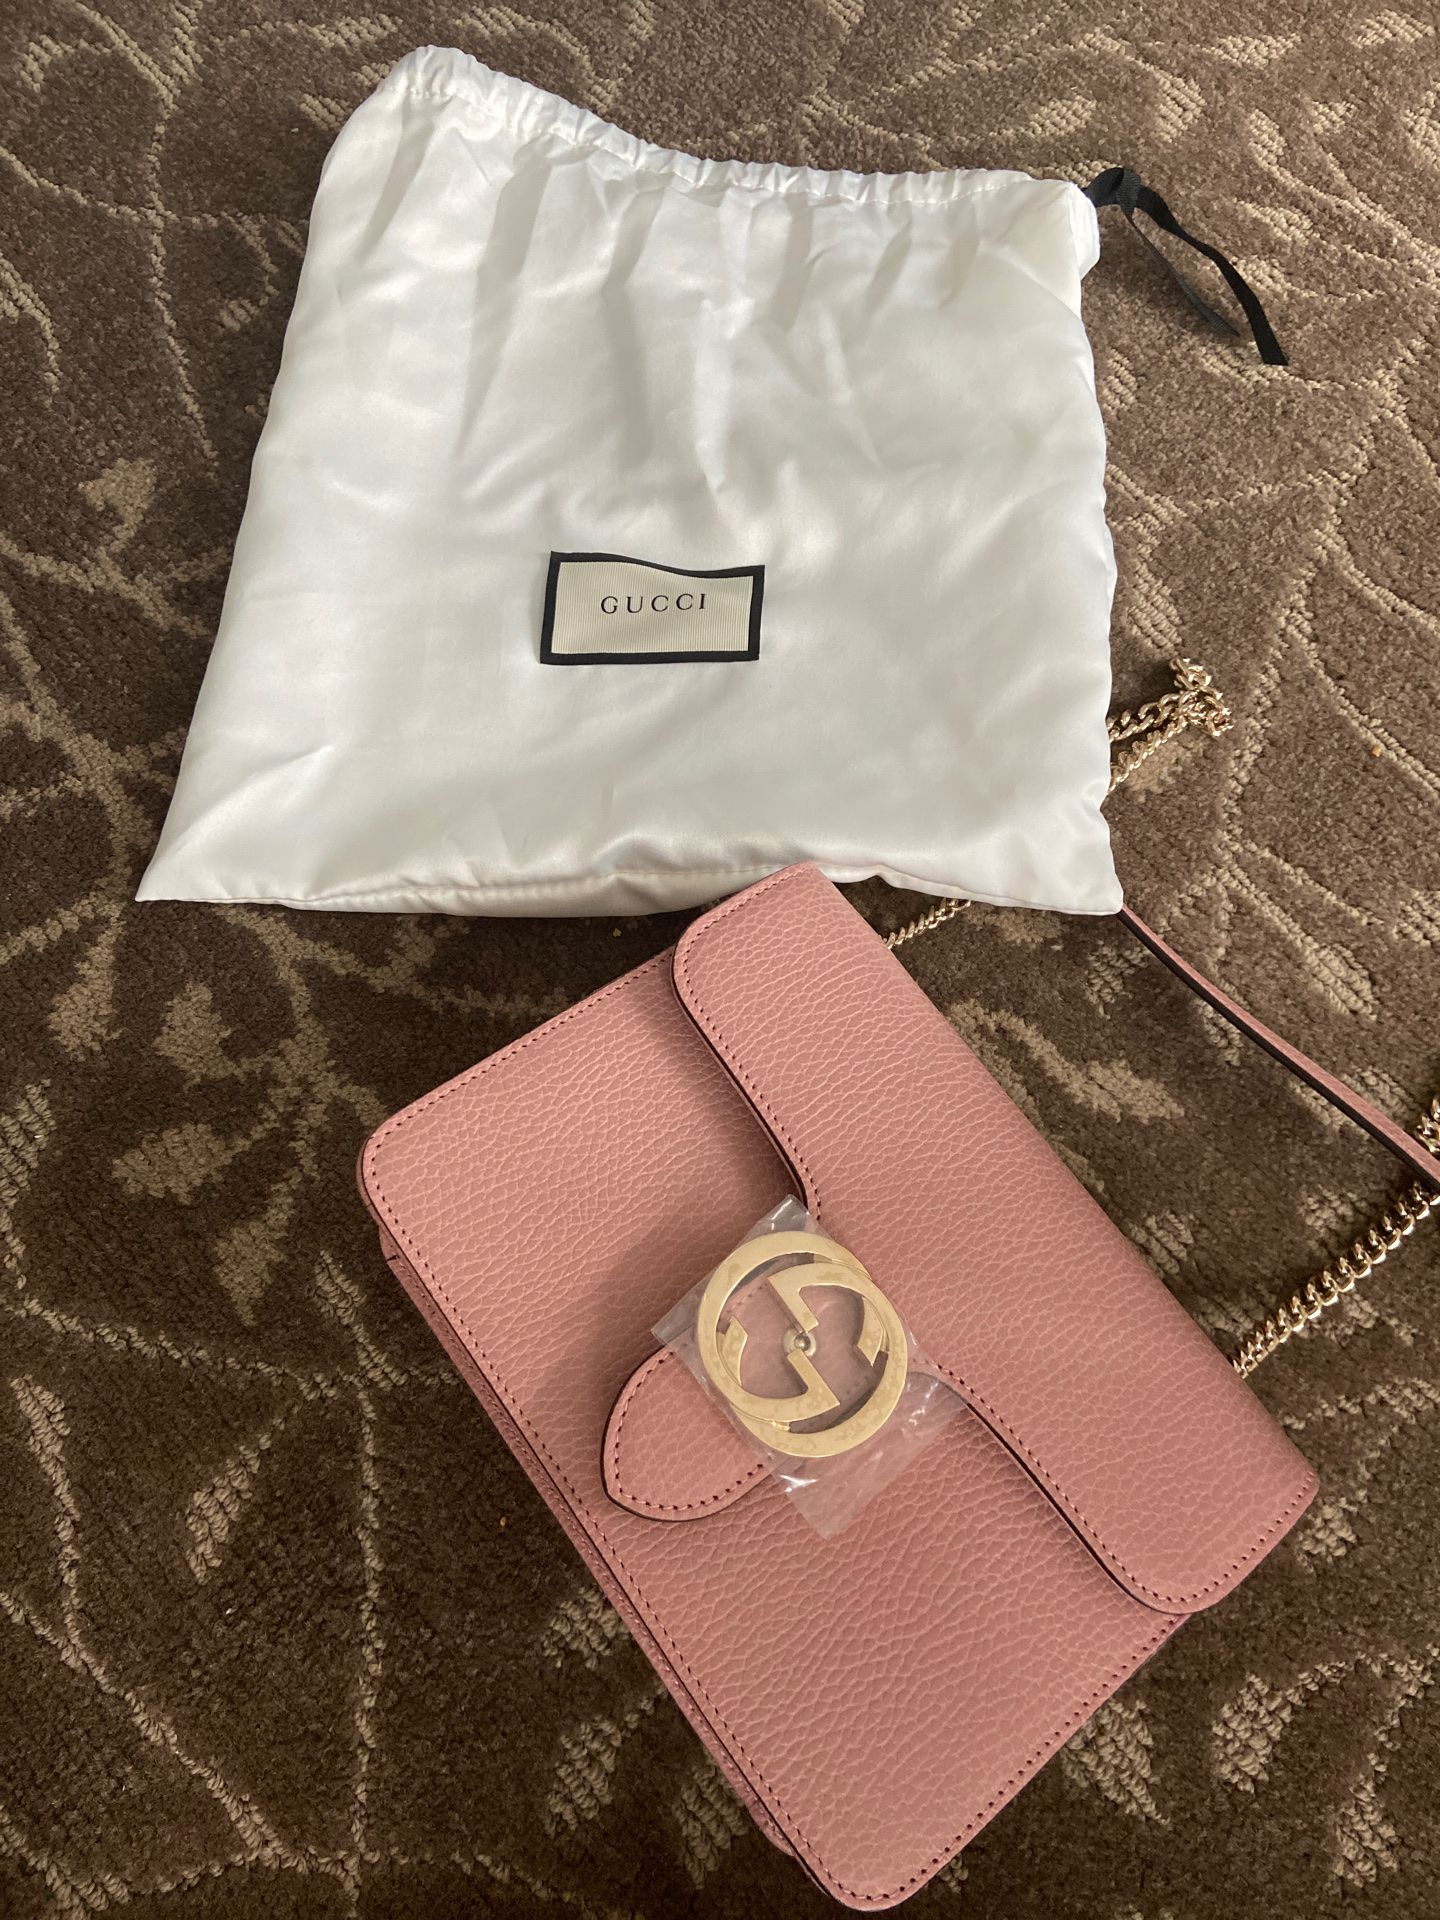 Gucci smooth leather purse brand new